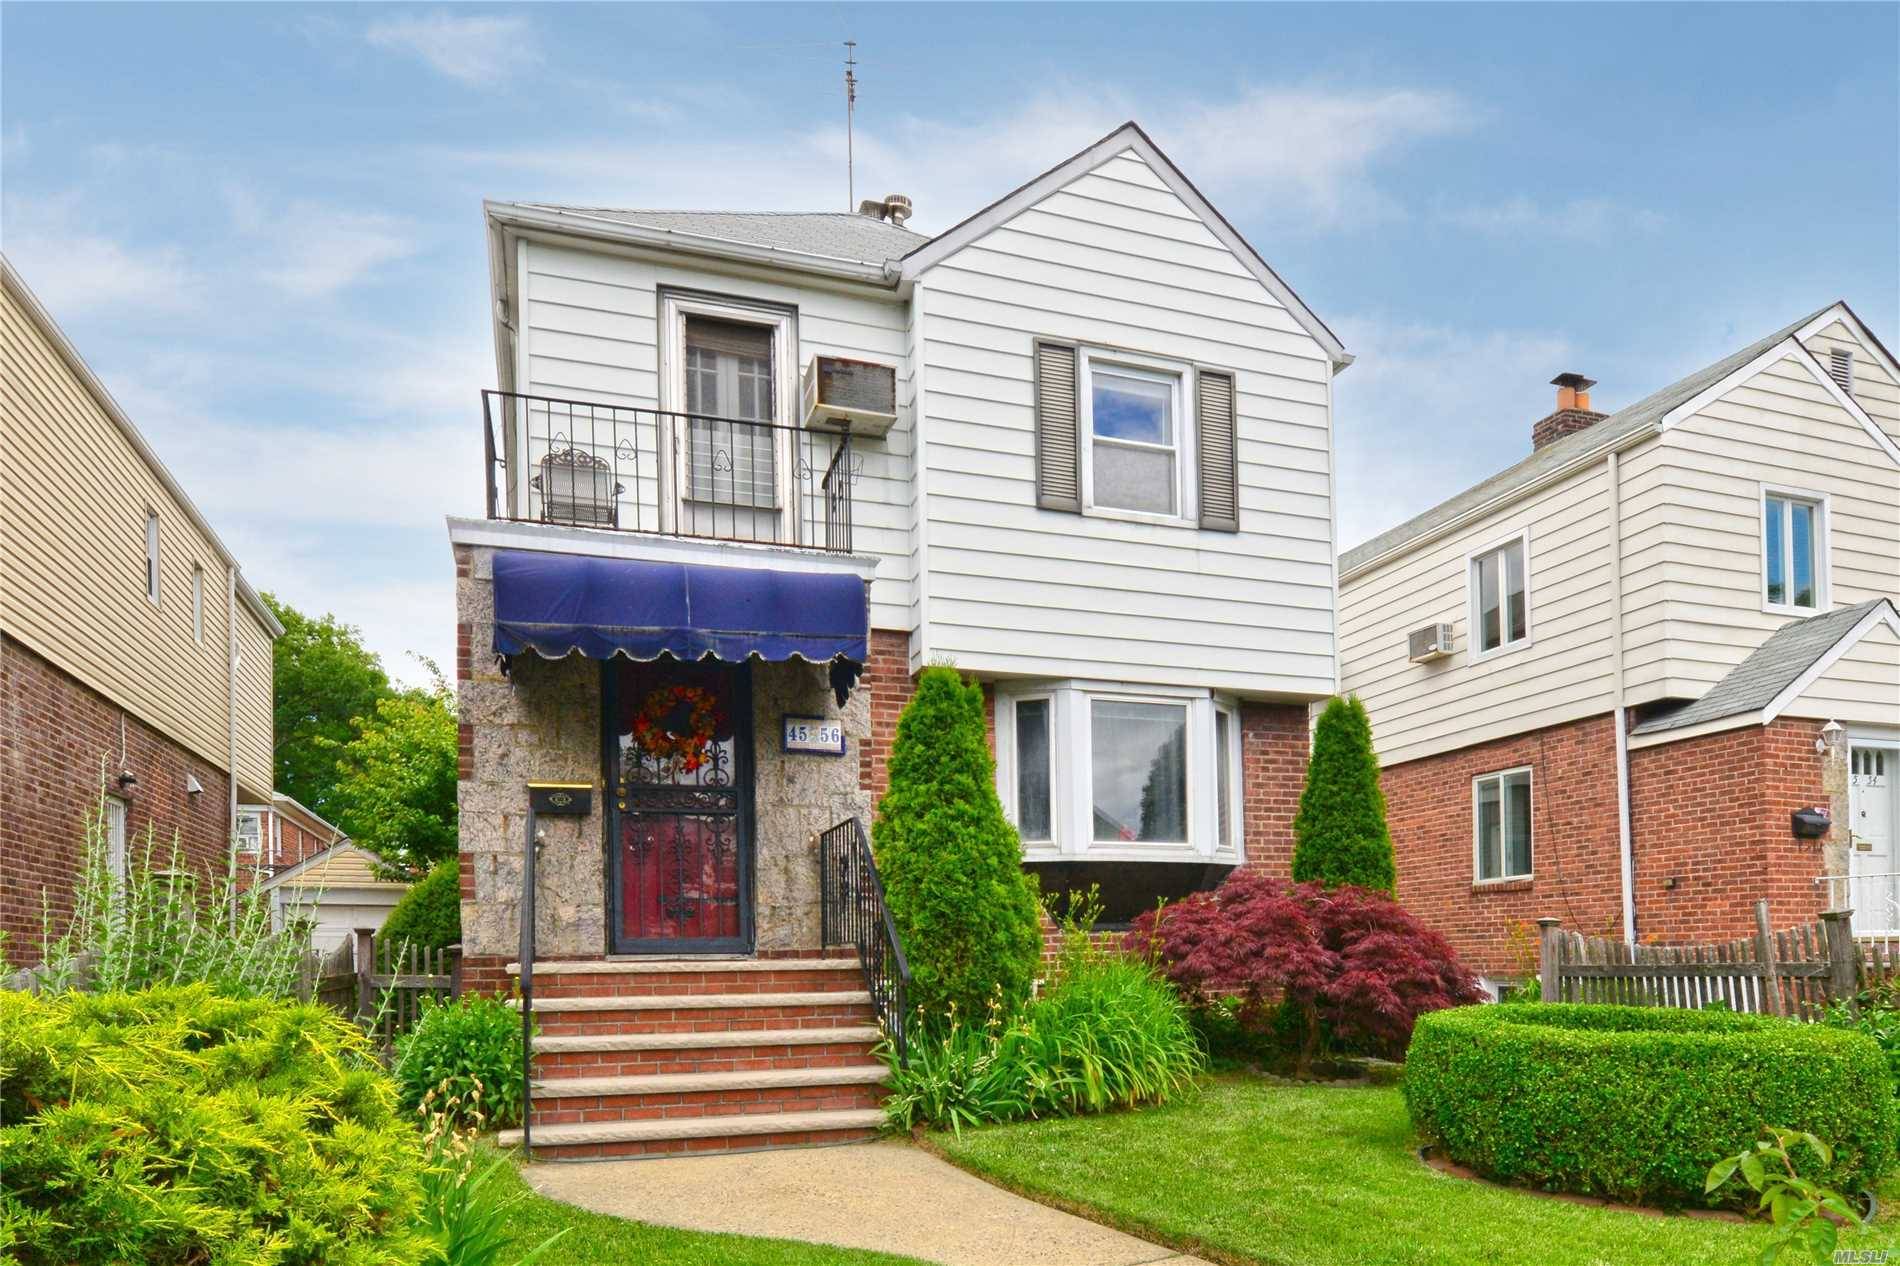 Lovely Detached Colonial Conveniently Located To Shopping & Transportation - Q27 To Main Street #7 Train.